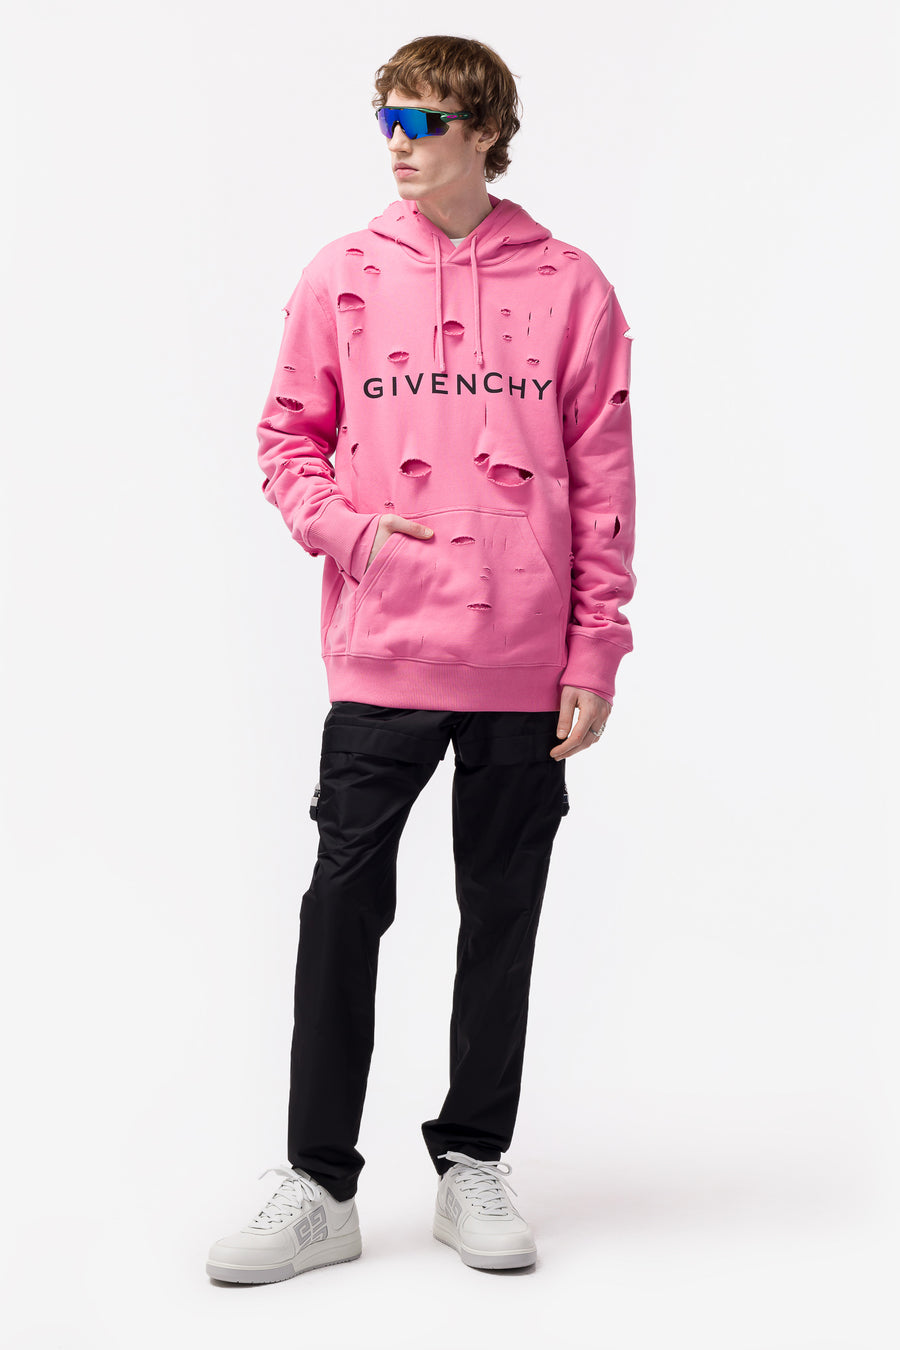 Givenchy - Men's Classic Fit Hole Hoodie in Bright Pink